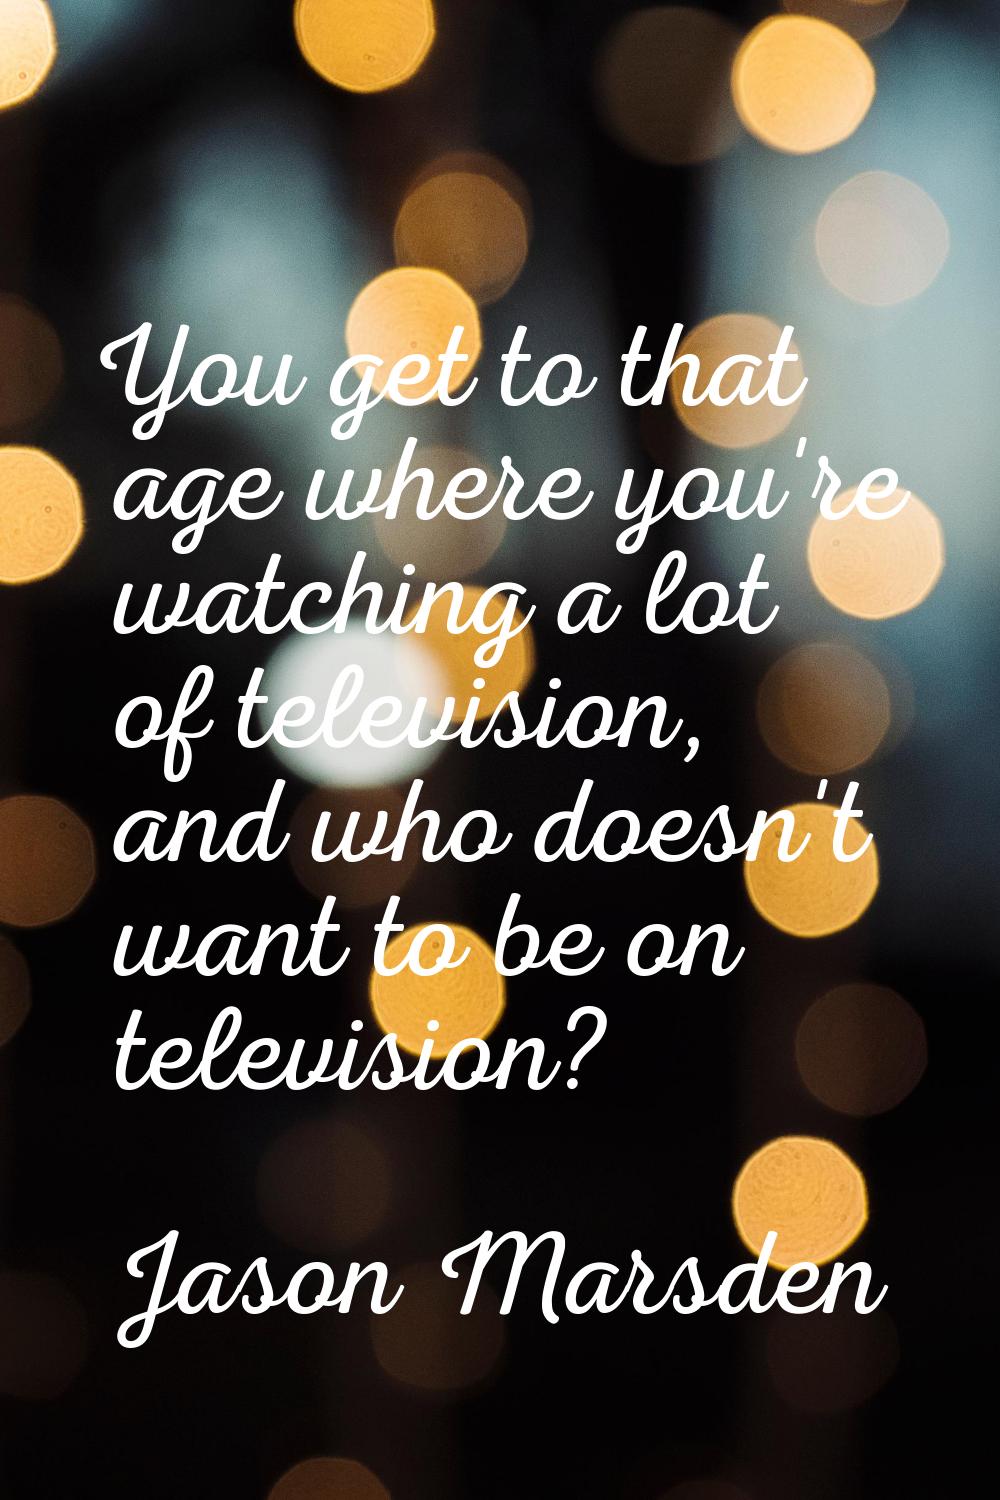 You get to that age where you're watching a lot of television, and who doesn't want to be on televi